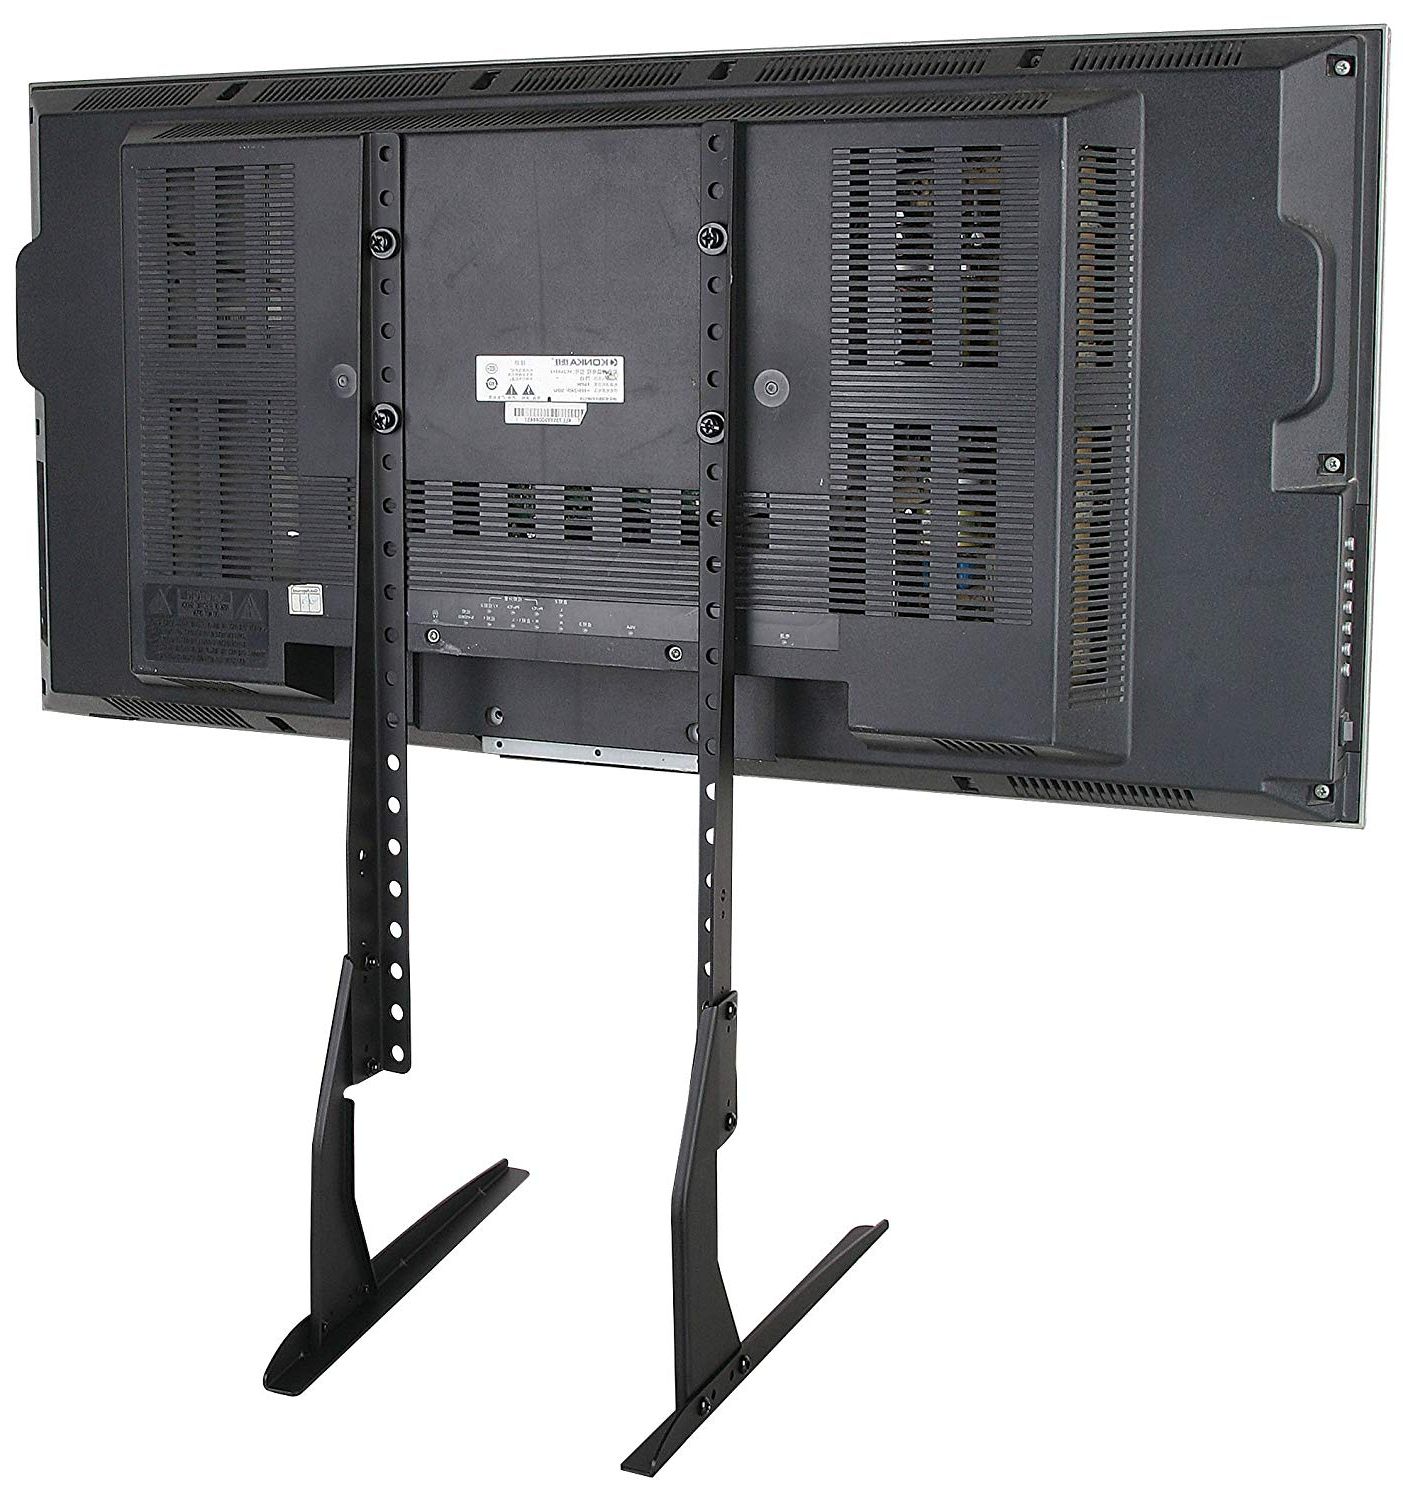 Tv Riser Stand With Regard To Most Up To Date Avds202 Monitor / Tv Riser Desk Pedestal Tabletop (View 17 of 20)